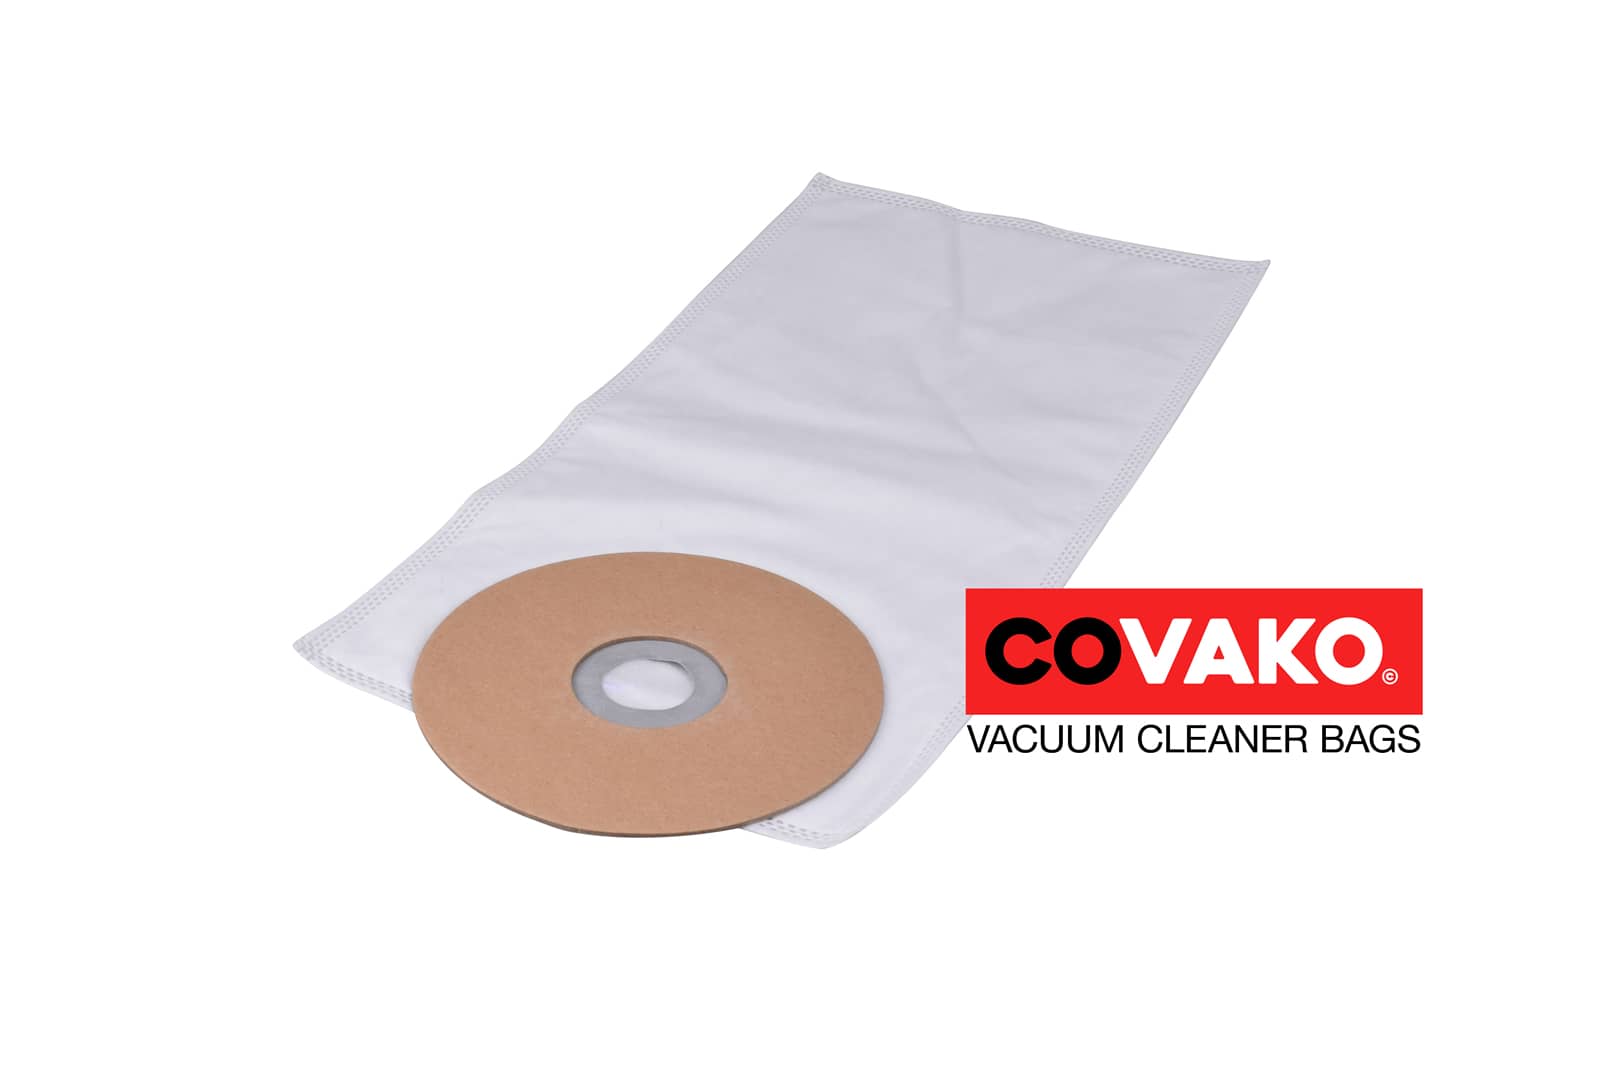 Fimap 439719 / Synthesis - Fimap vacuum cleaner bags